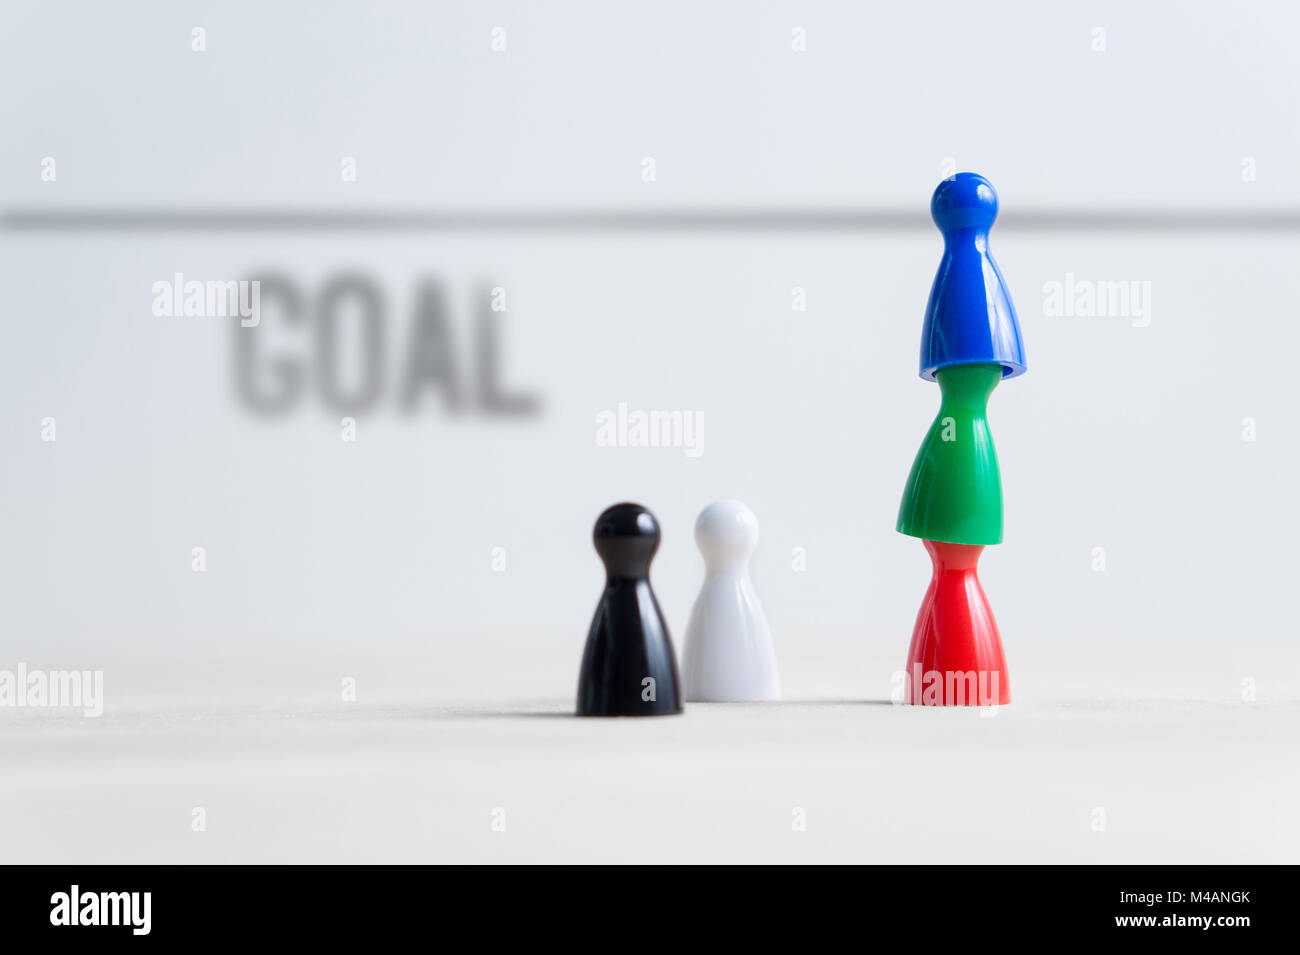 Teamwork, reaching goals, working together and success concept. Colorful board game pawns on each other. Cooperation, leadership and achievement. Stock Photo